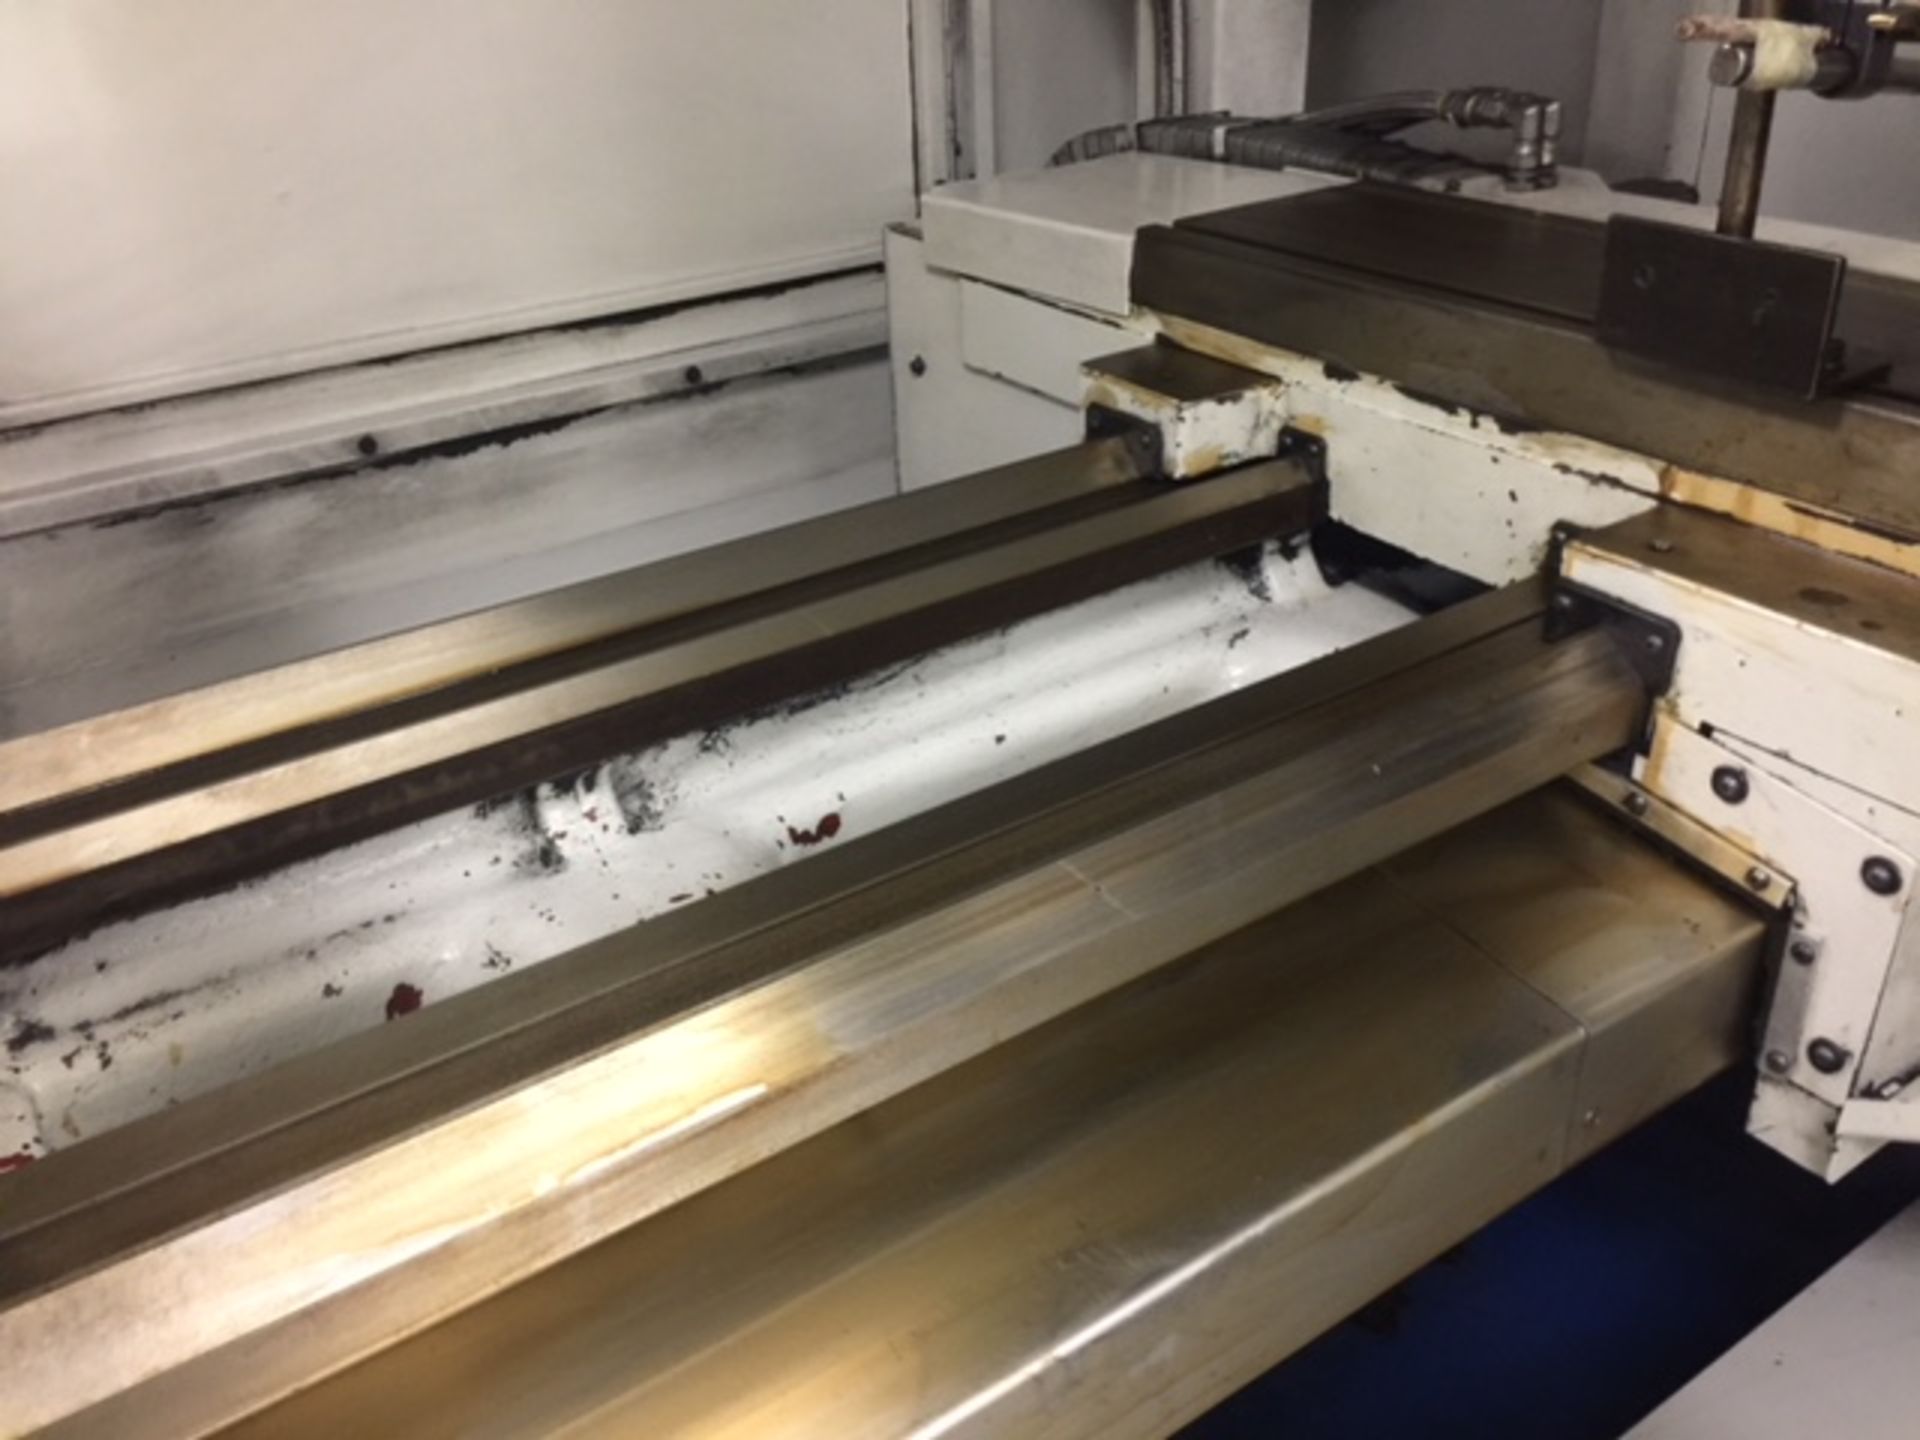 24" x 40" Acra Model FEL-24x40-ENC CNC Lathe with C Axis Milling - Image 9 of 10